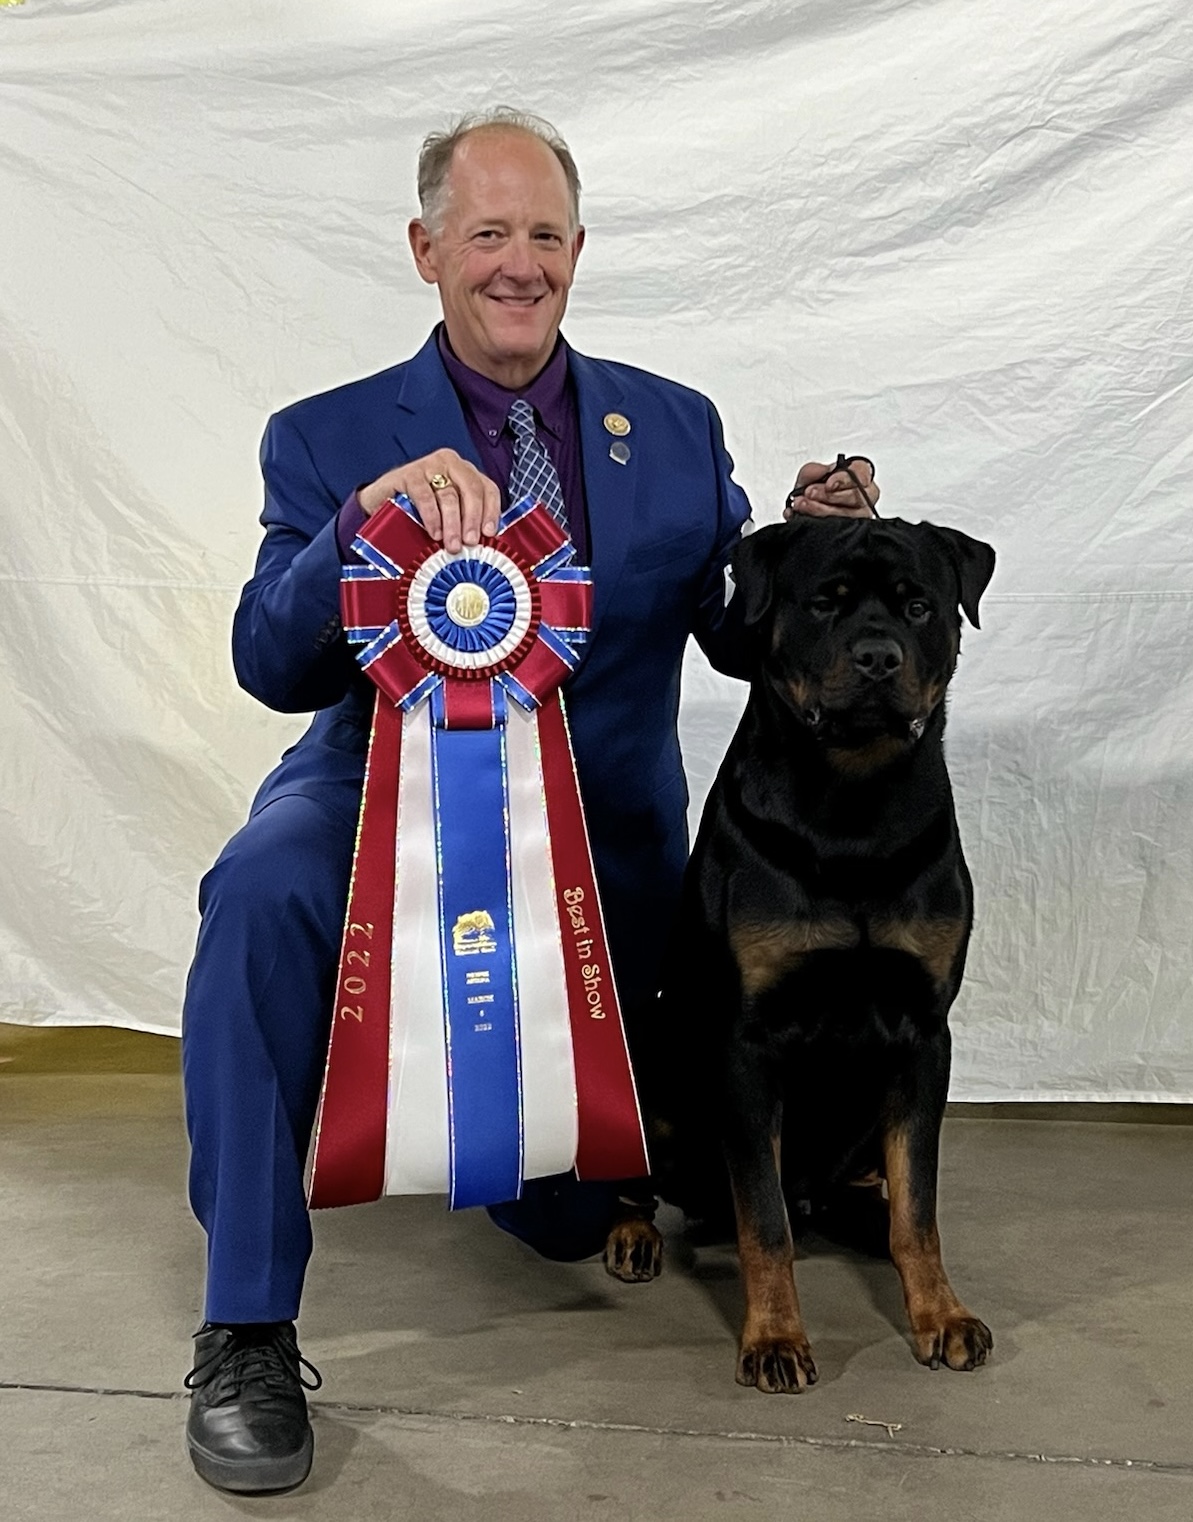 Superstition Kennel Club, Inc. Saturday, March 5, 2022 Canine Chronicle